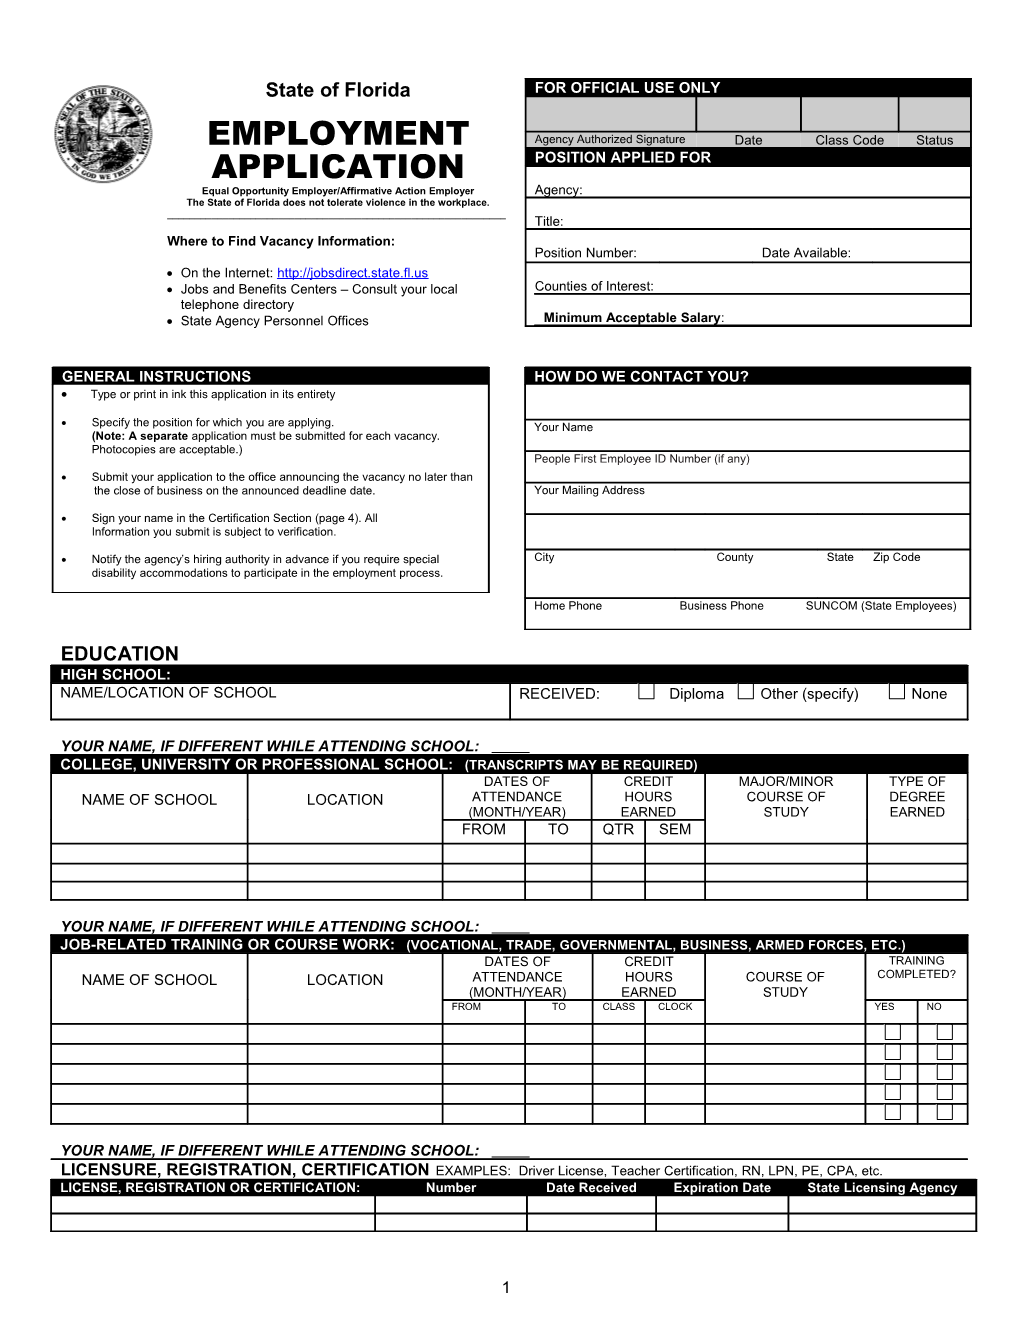 State Application Form